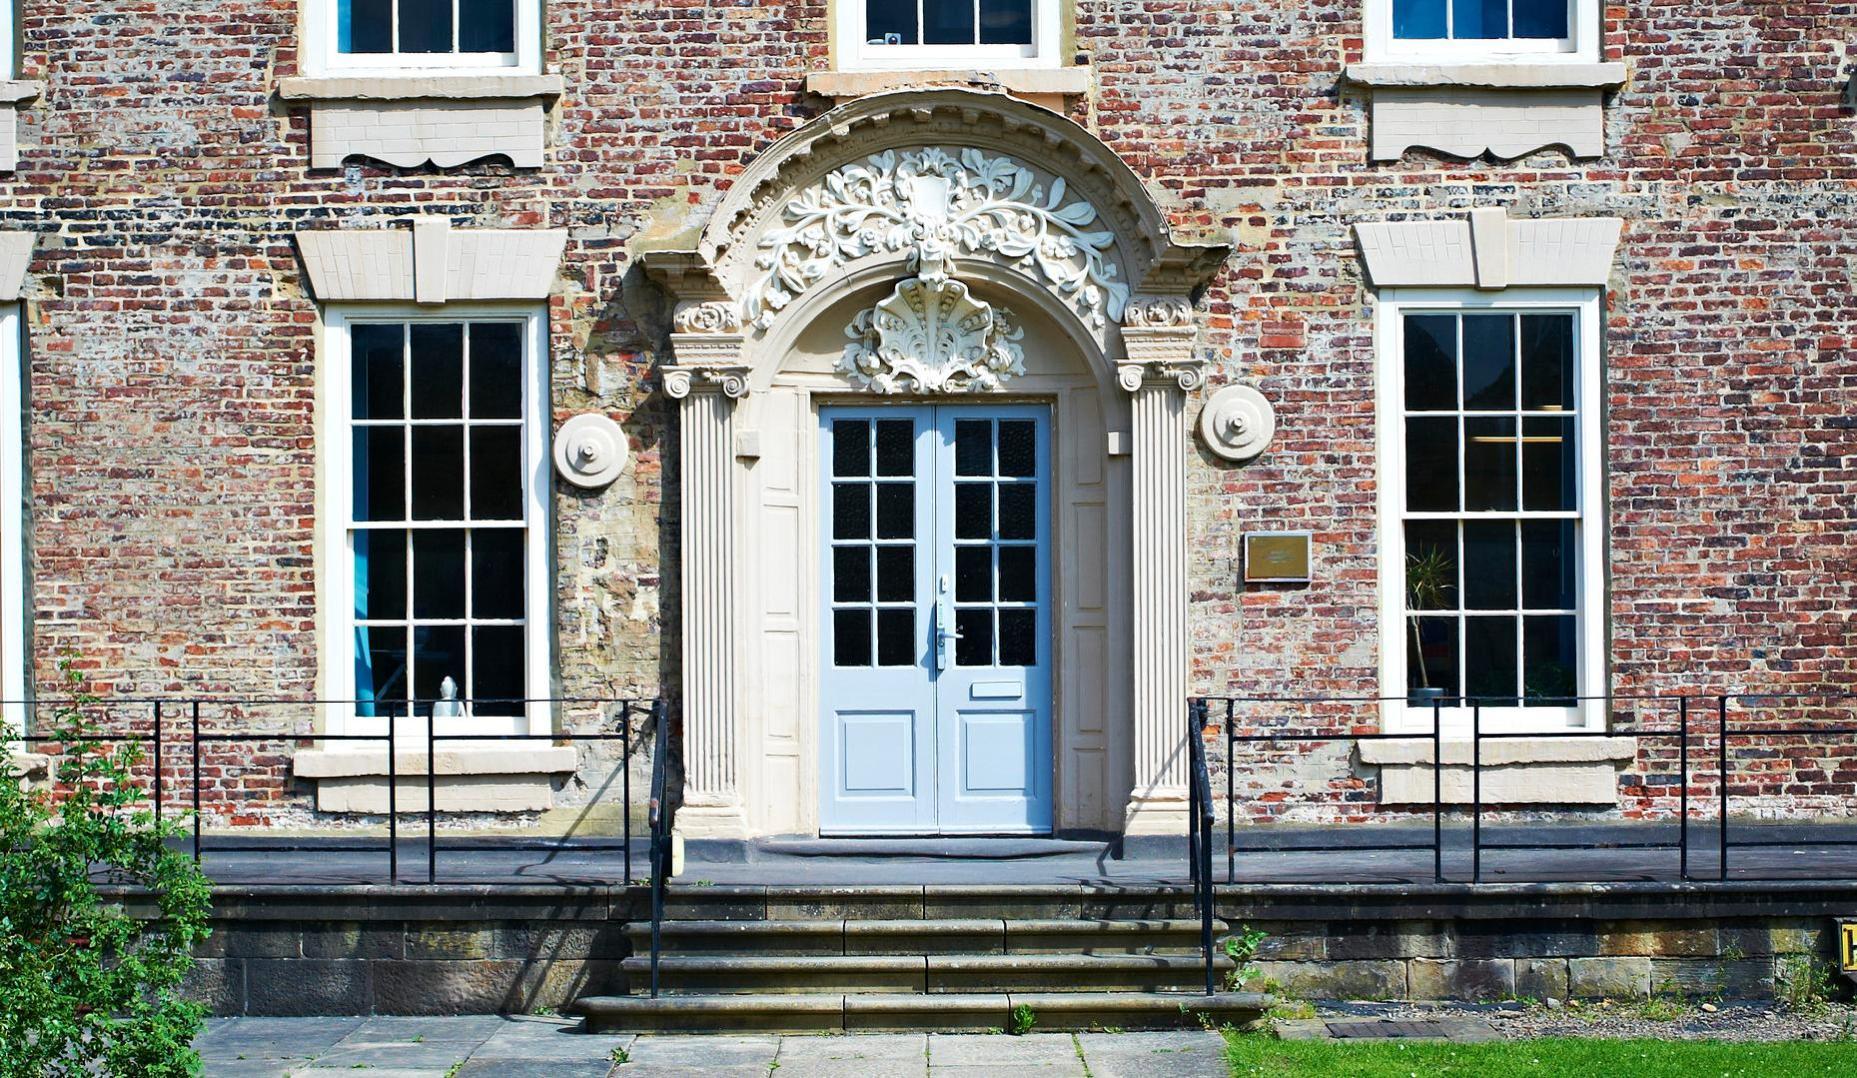 TExternal shot of the front door leading into the institute of advanced study